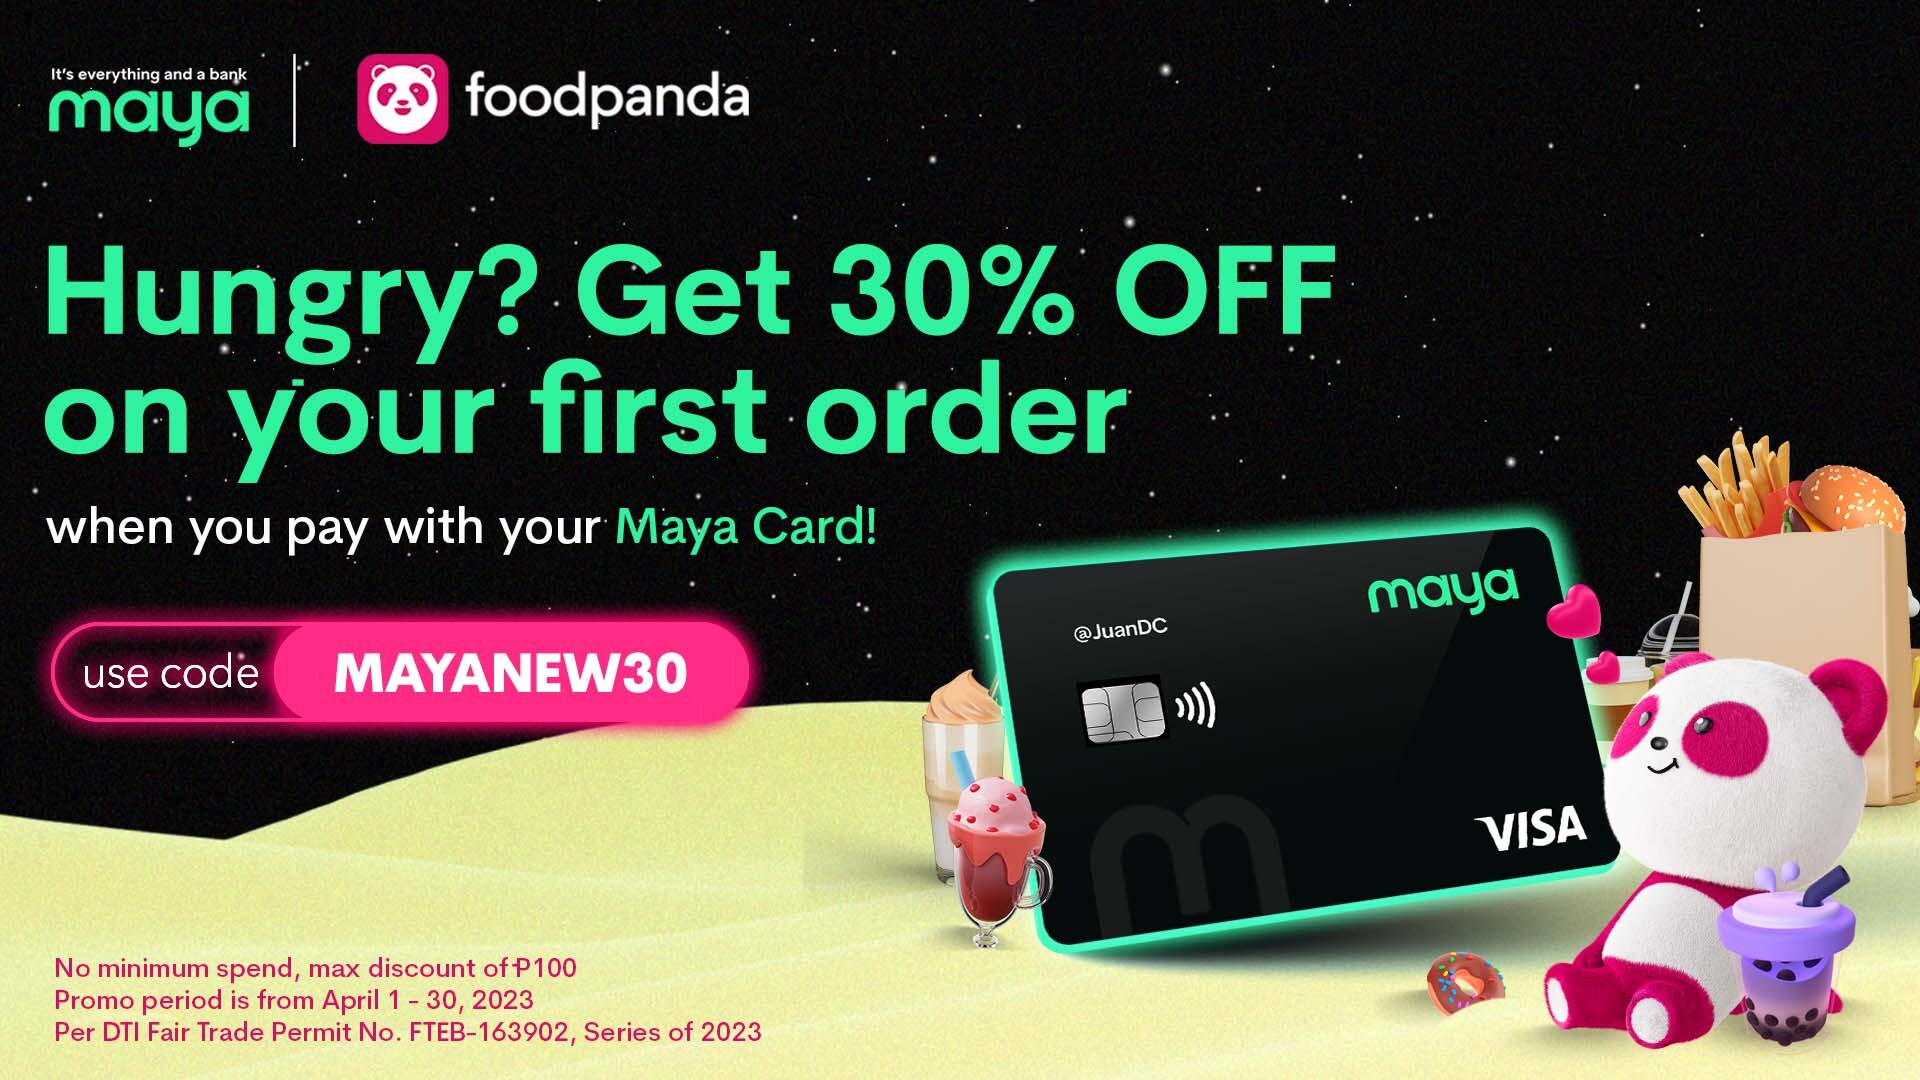 Get 30% OFF for new foodpanda users!